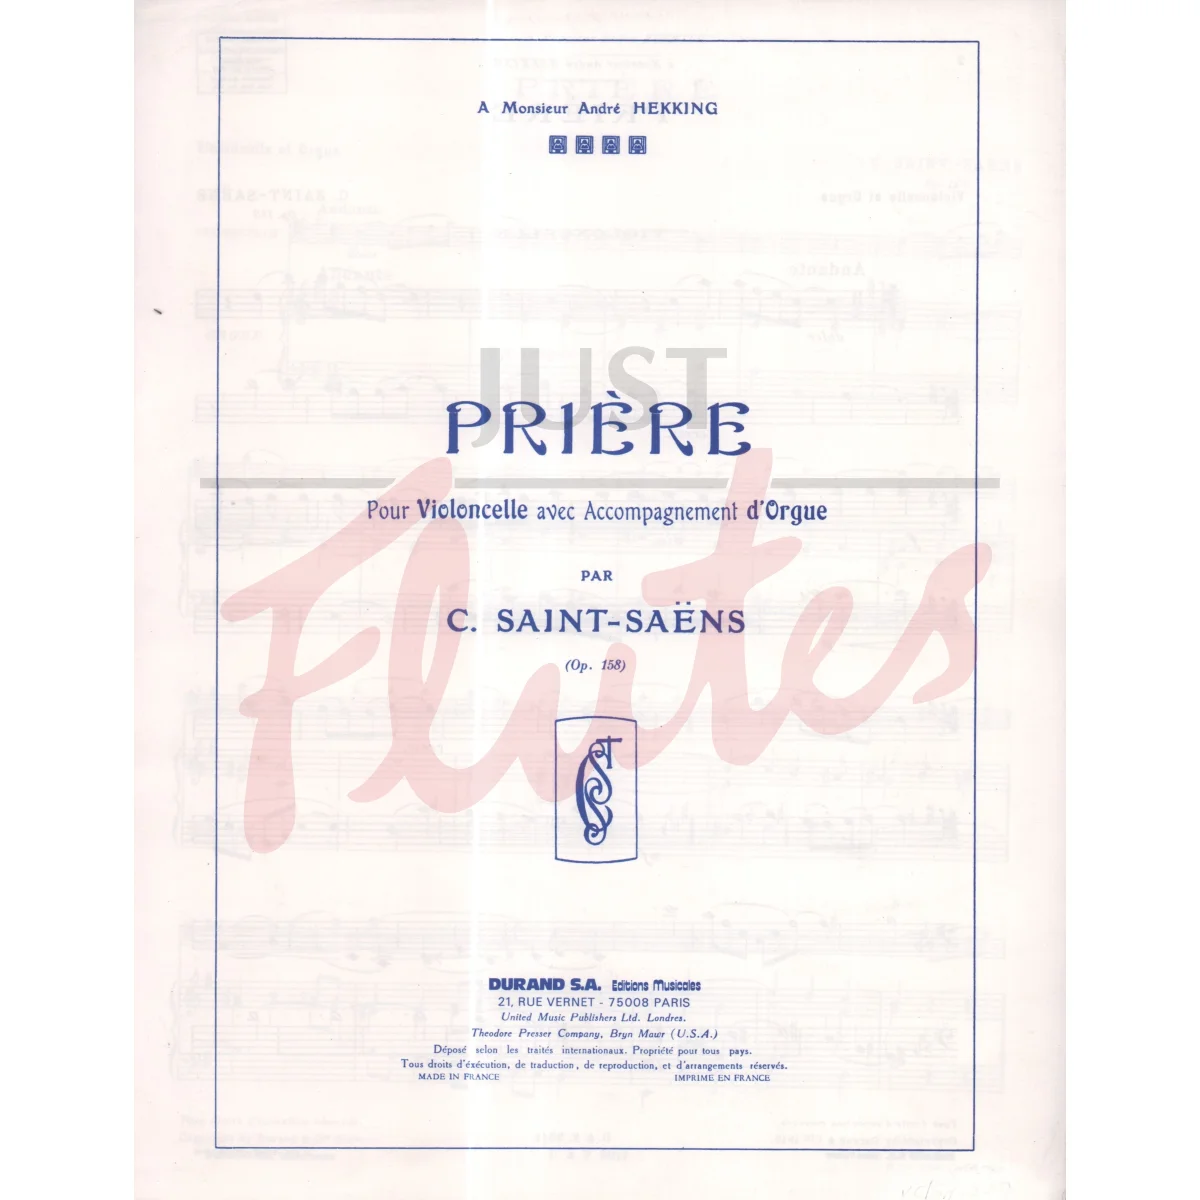 Prière for Cello and Organ